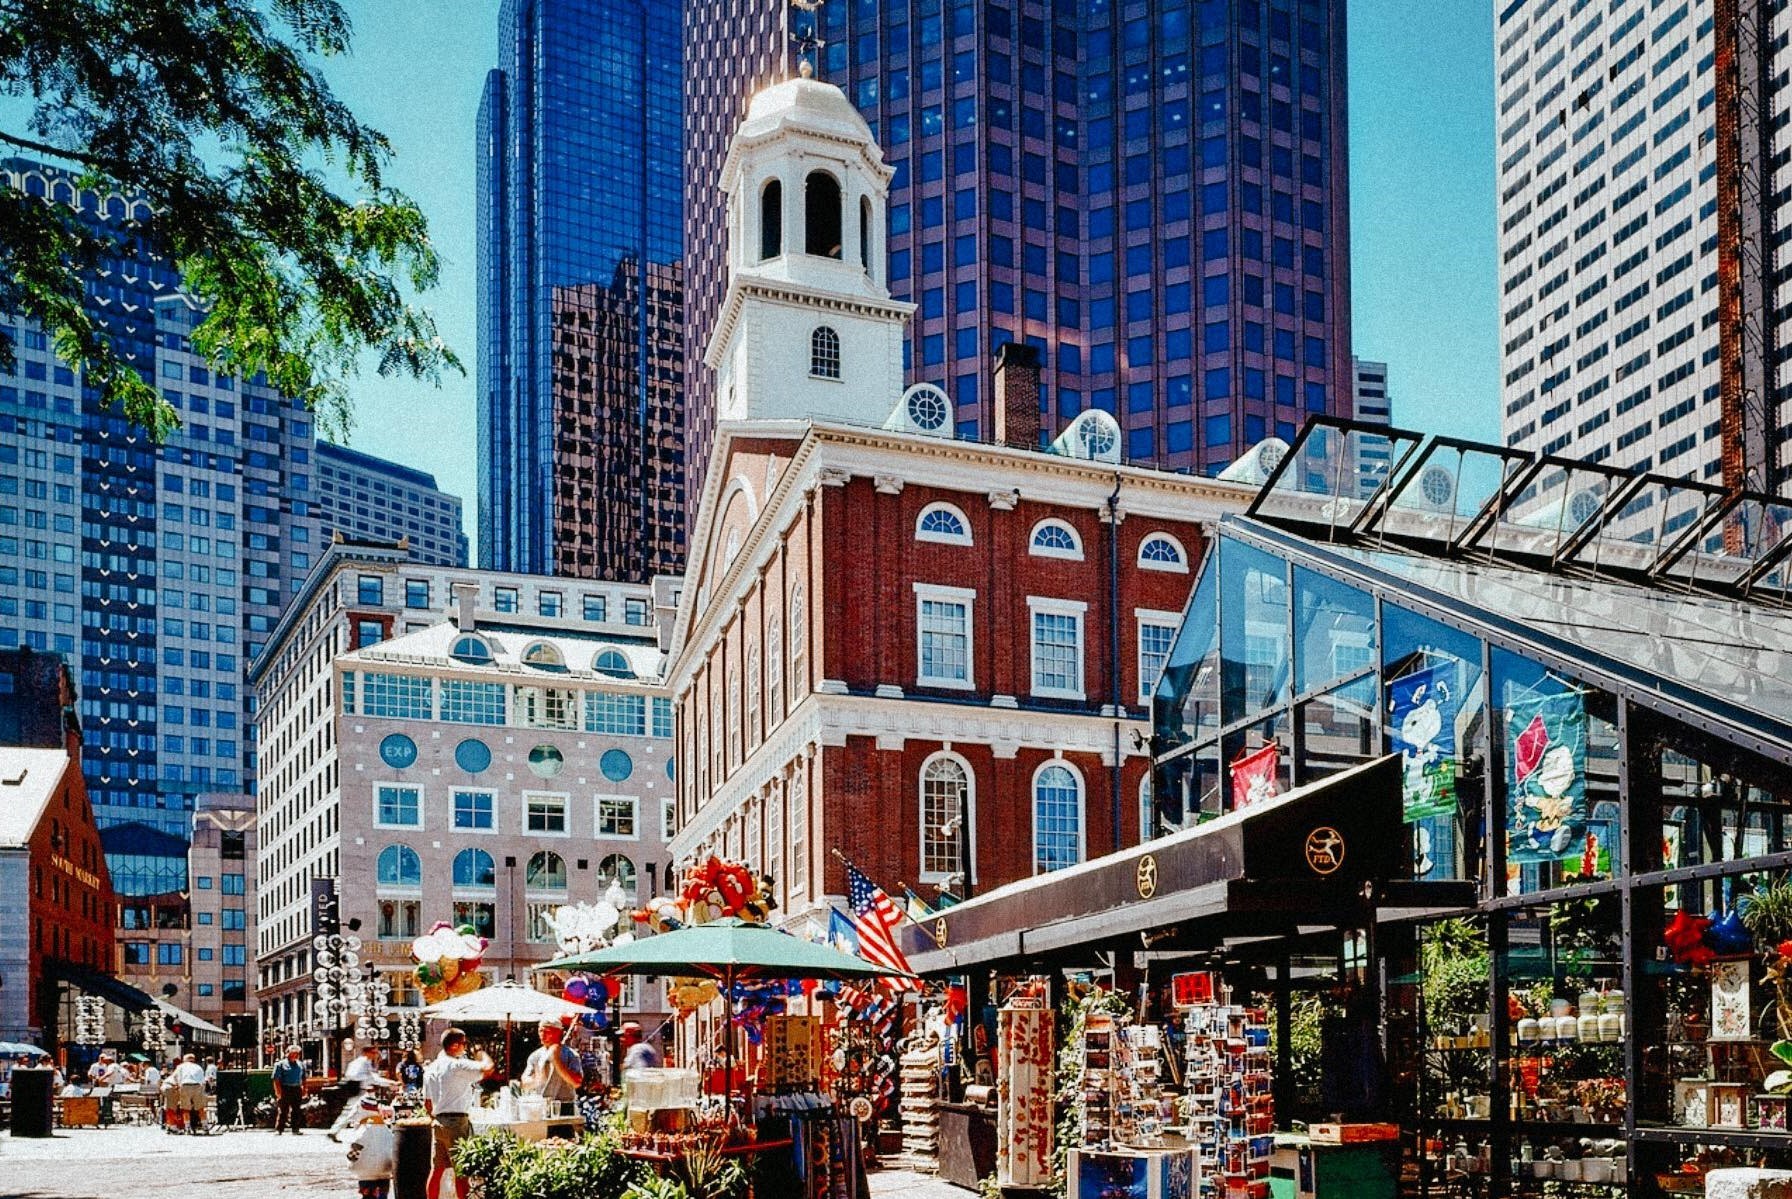 Collection of buildings of varying style and age in downtown Boston with skyscrapers in the background, an old historic building in the center with a tower (Faneuil Hall) and glass buildings on the sides